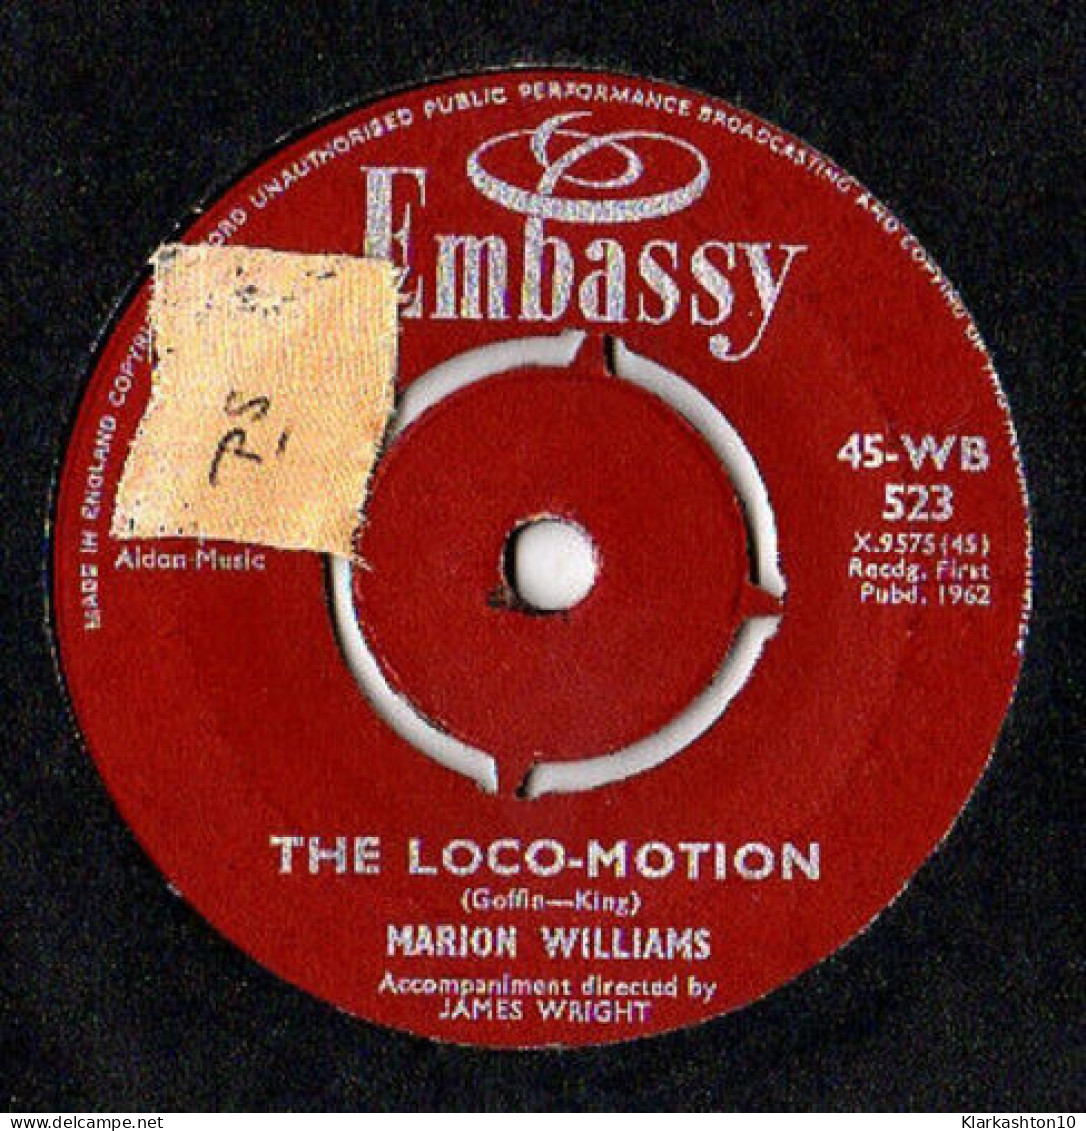 You Don't Know Me / The Loco-Motion - Unclassified